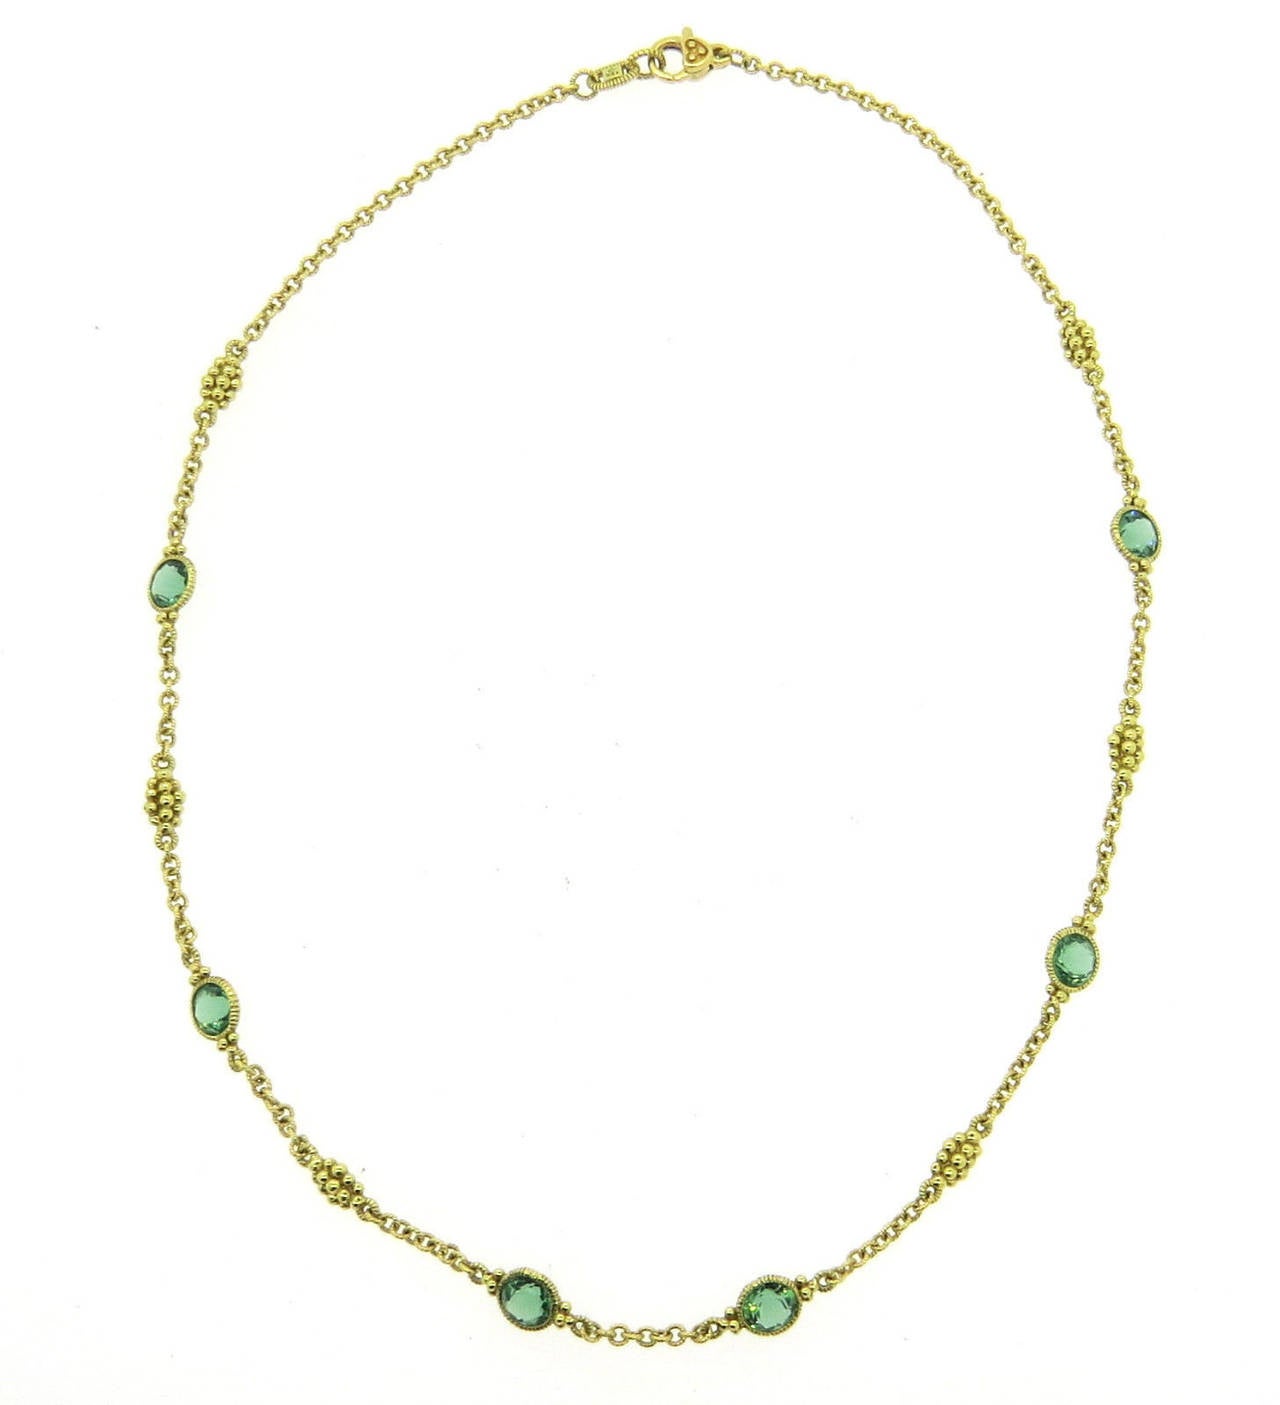 18k gold necklace, crafted by Judith Ripka, featuring green quartz stations. Necklace is 17